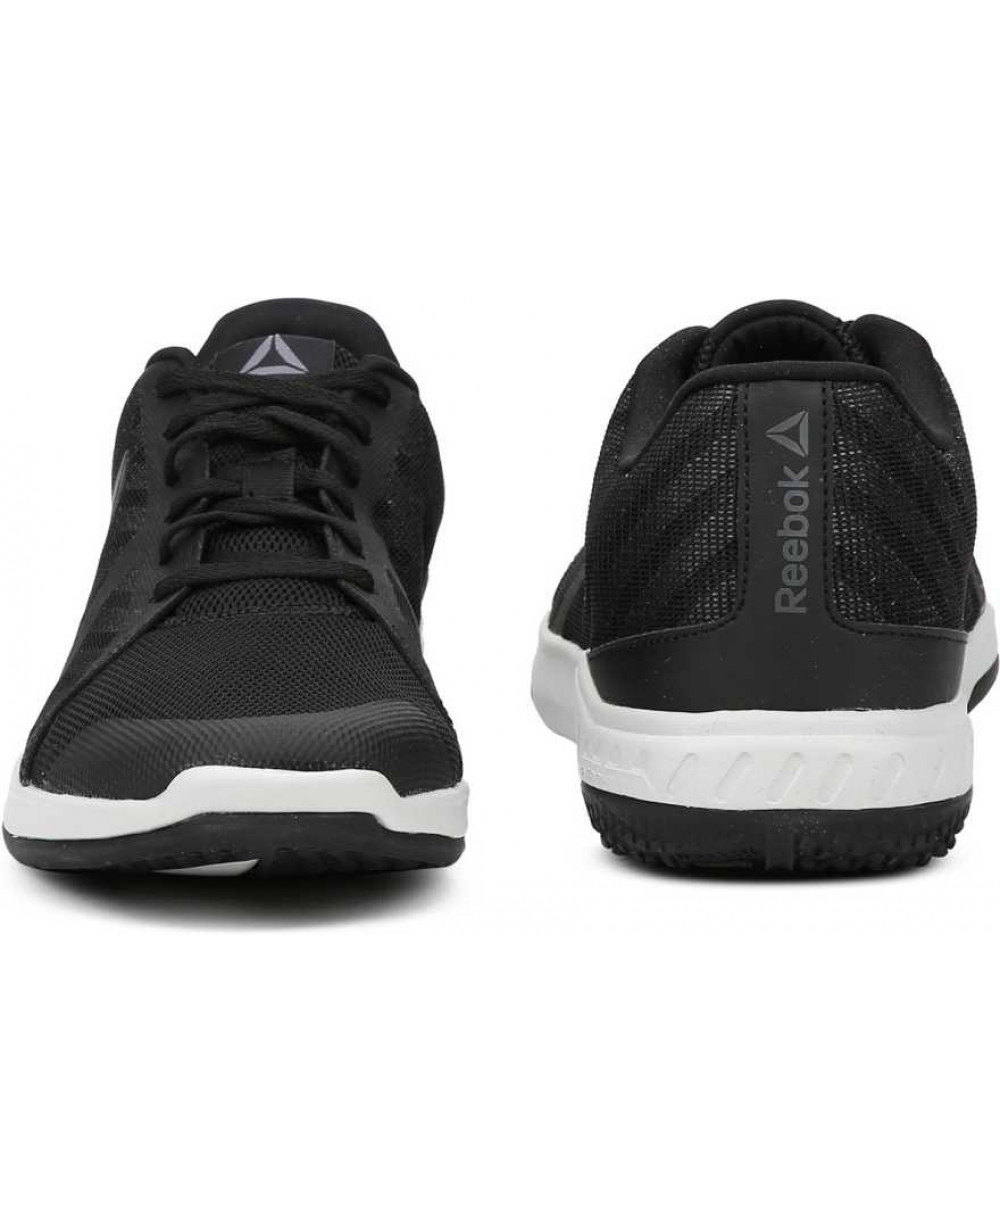 Connected Strait thong Stand up instead Reebok Everchill TR 2.0 Training Black Shoes Men CN1282